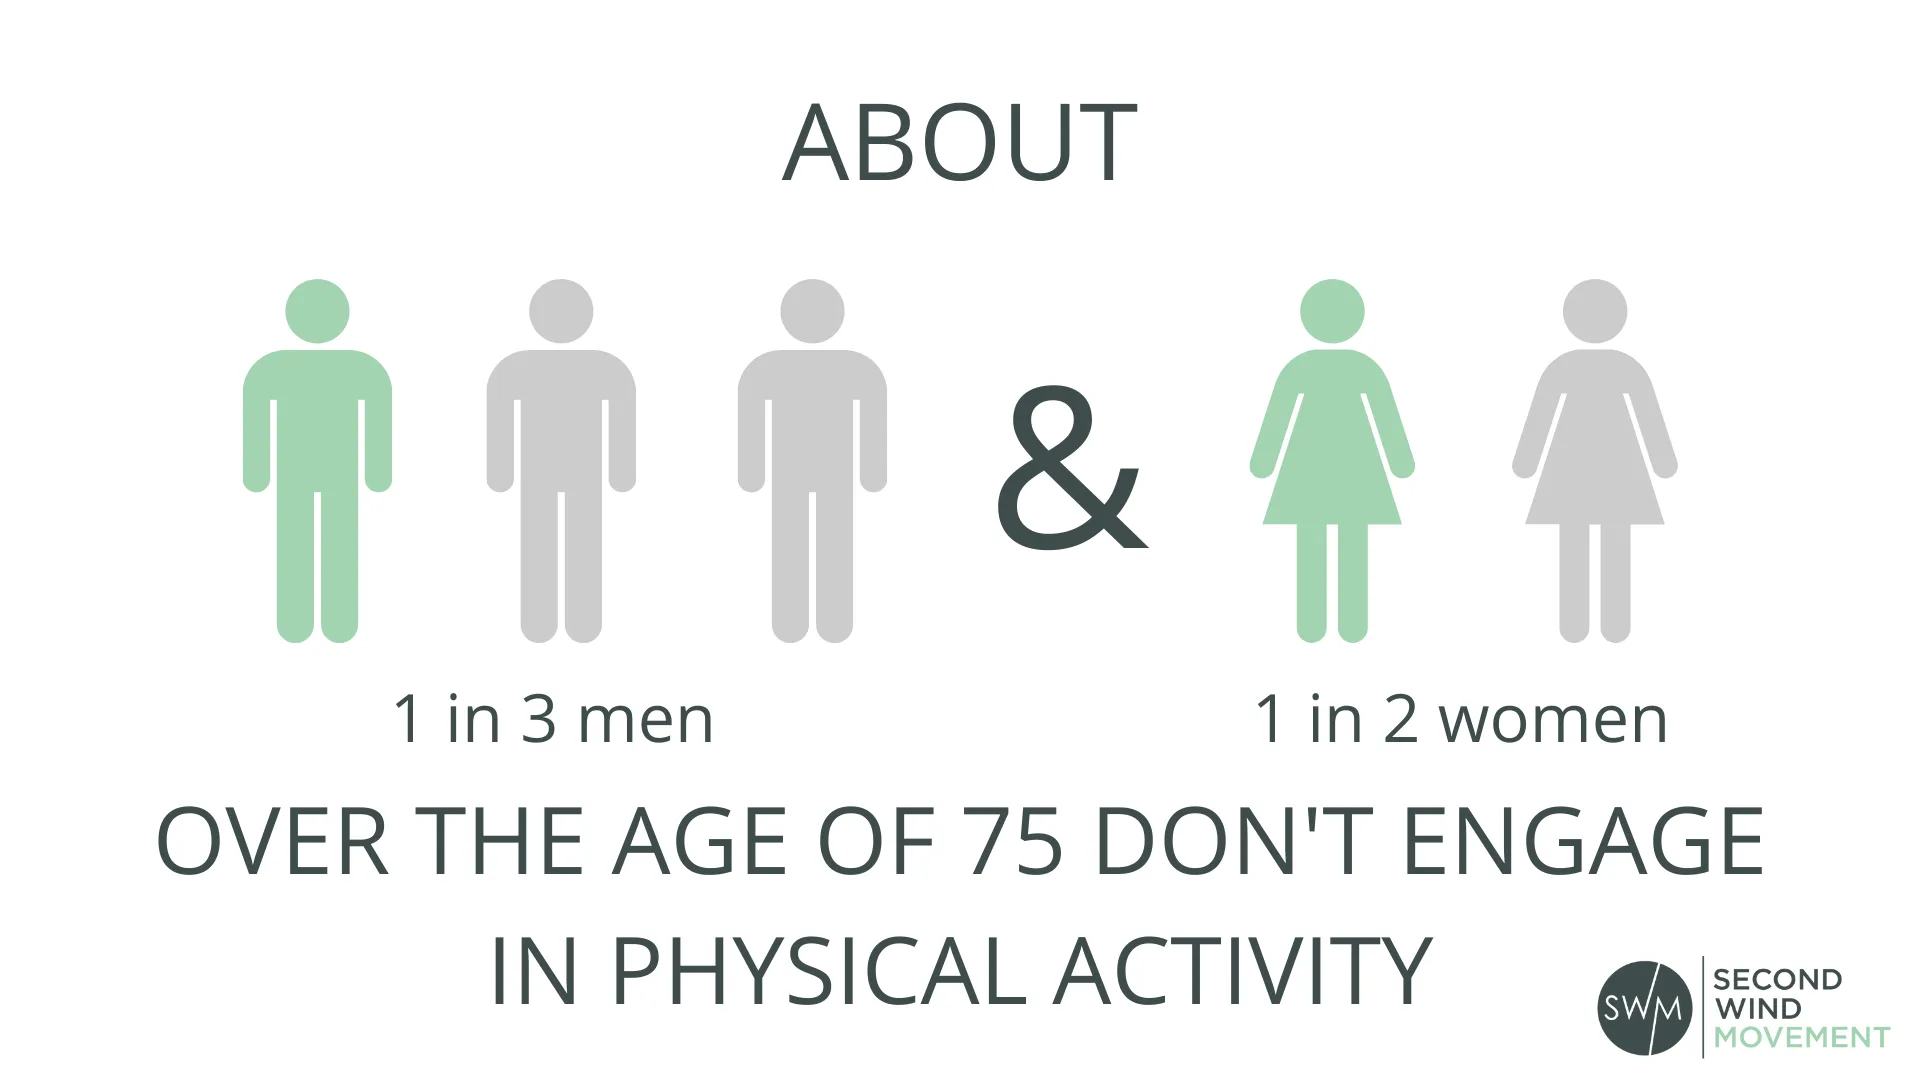 about 1 in 3 men and 1 in 2 women over the age of 75 dont engage in any physical activity